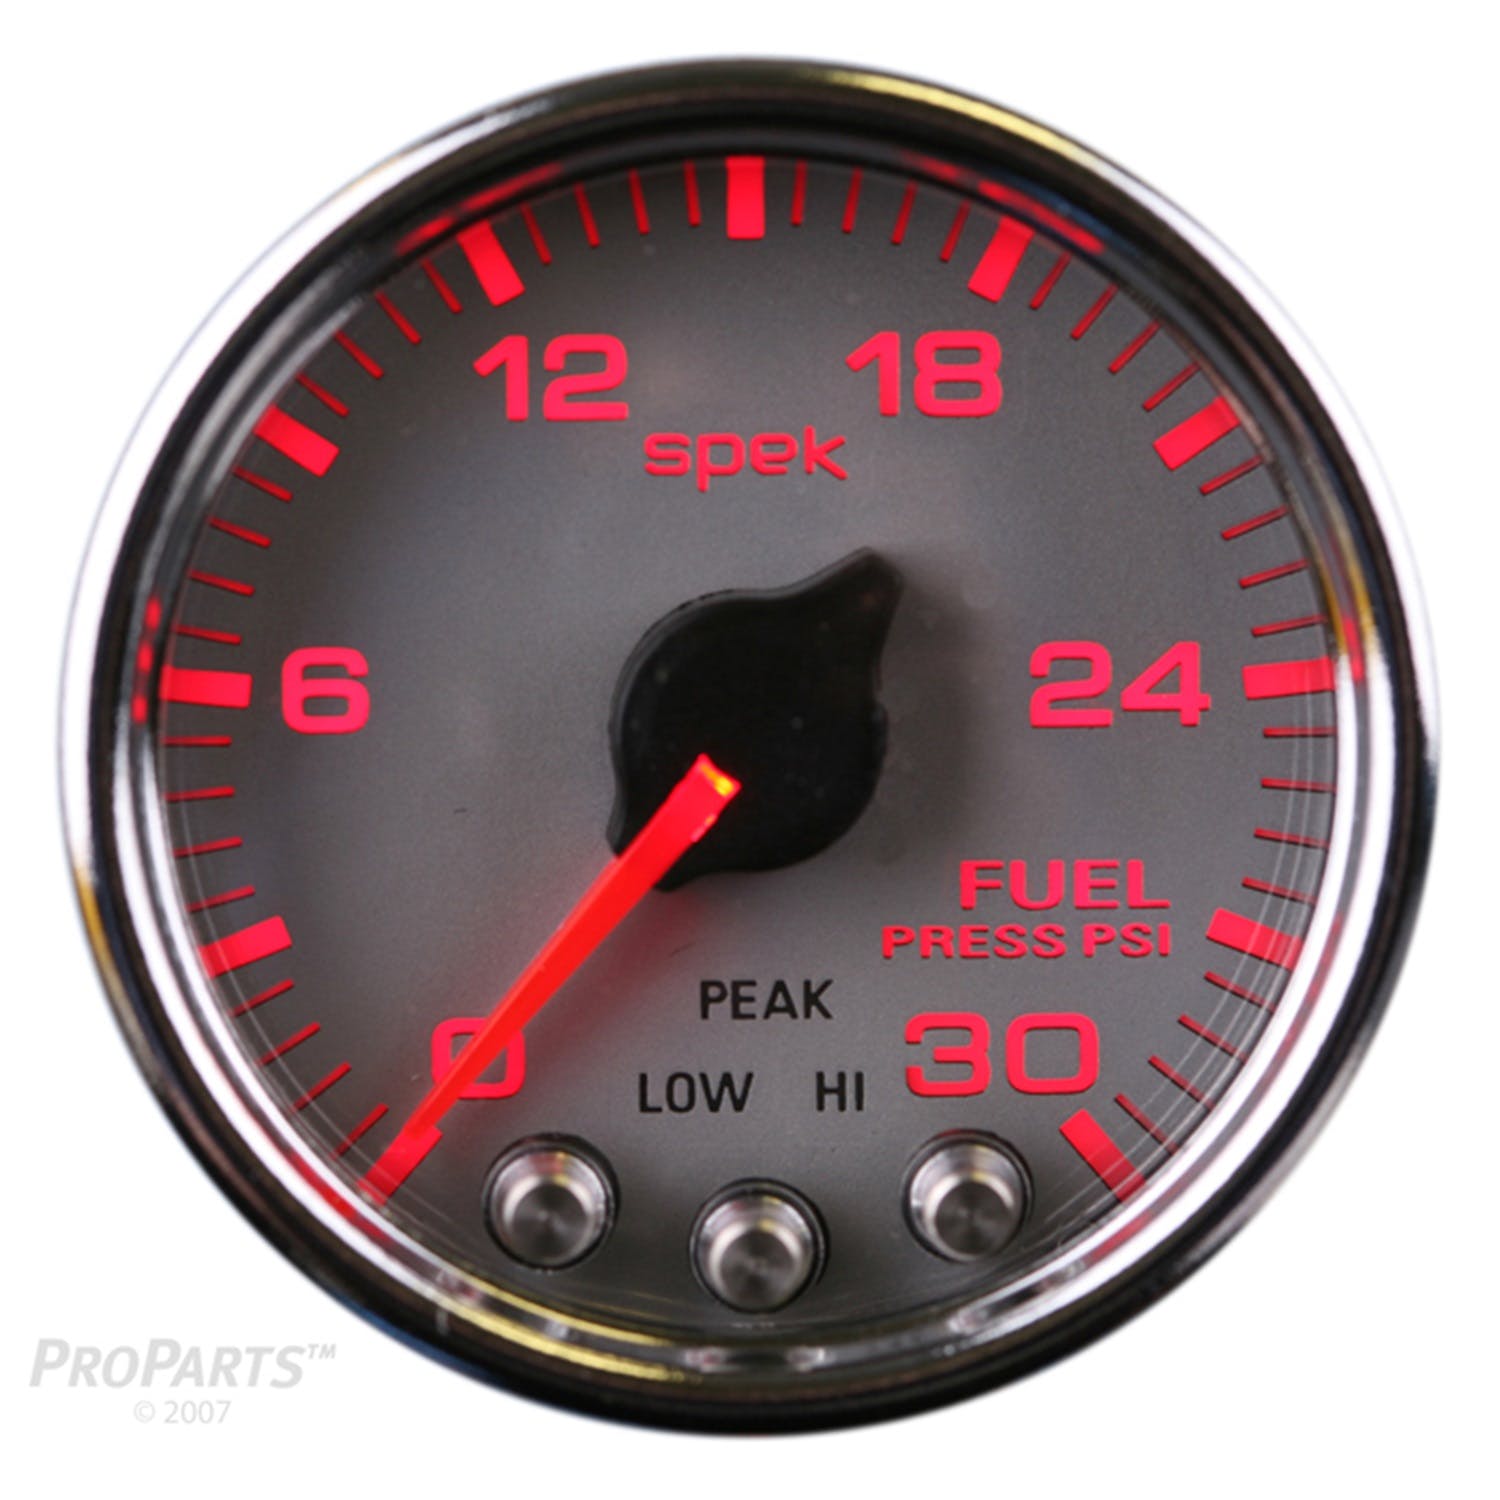 AutoMeter Products P31621 Fuel Pressure Gauge, 2 116, 30PSI, Stepper Motor Silver